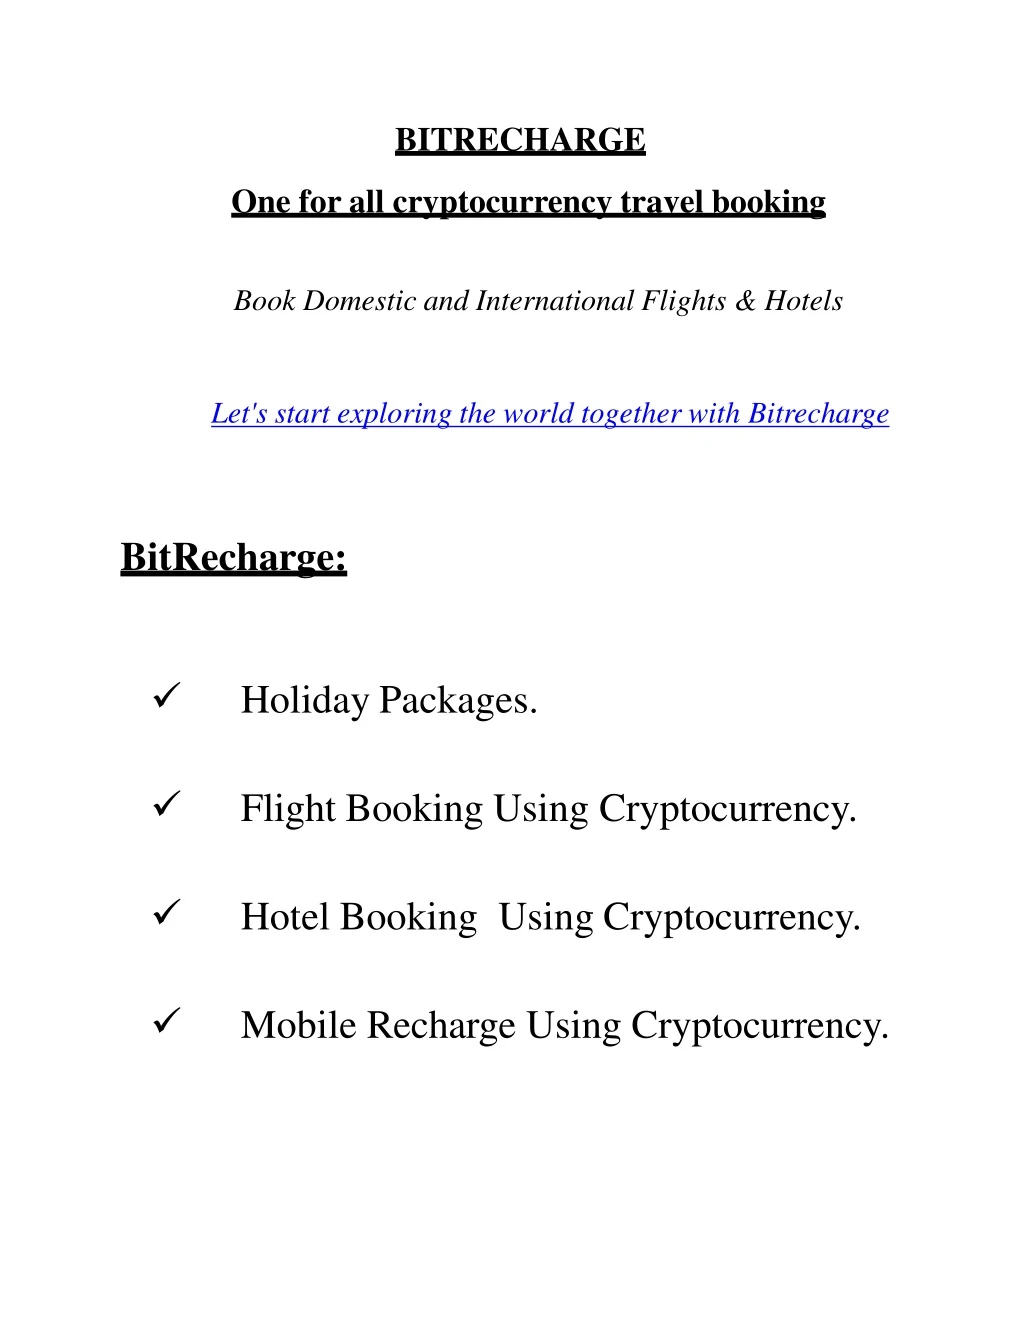 bitrecharge one for all cryptocurrency travel